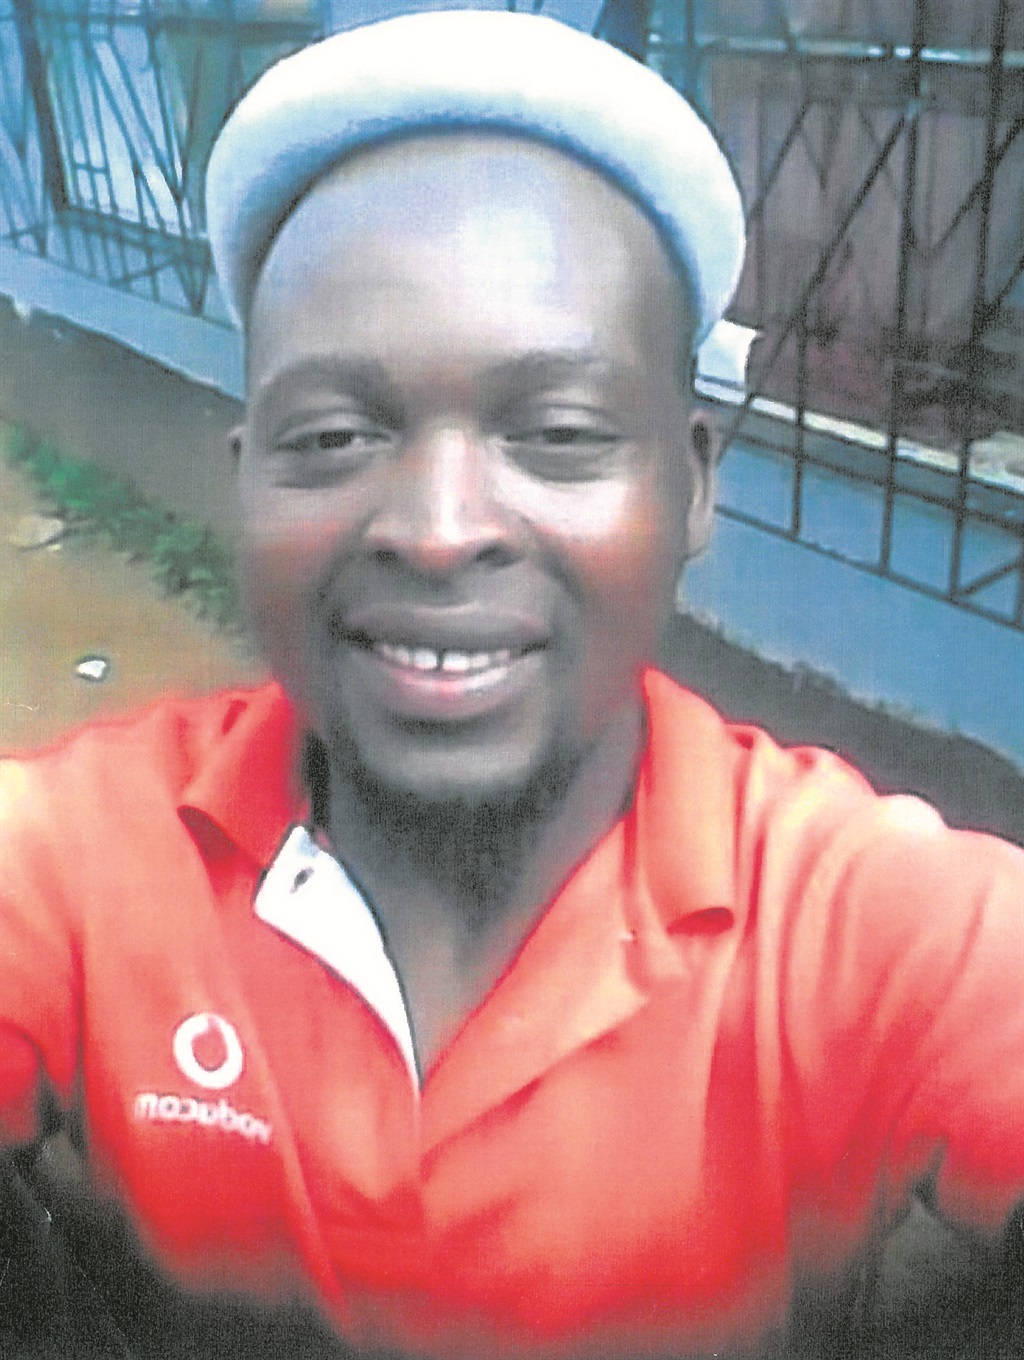 Police are looking for Njabulo Mofokeng in connection with a series of crimes. 